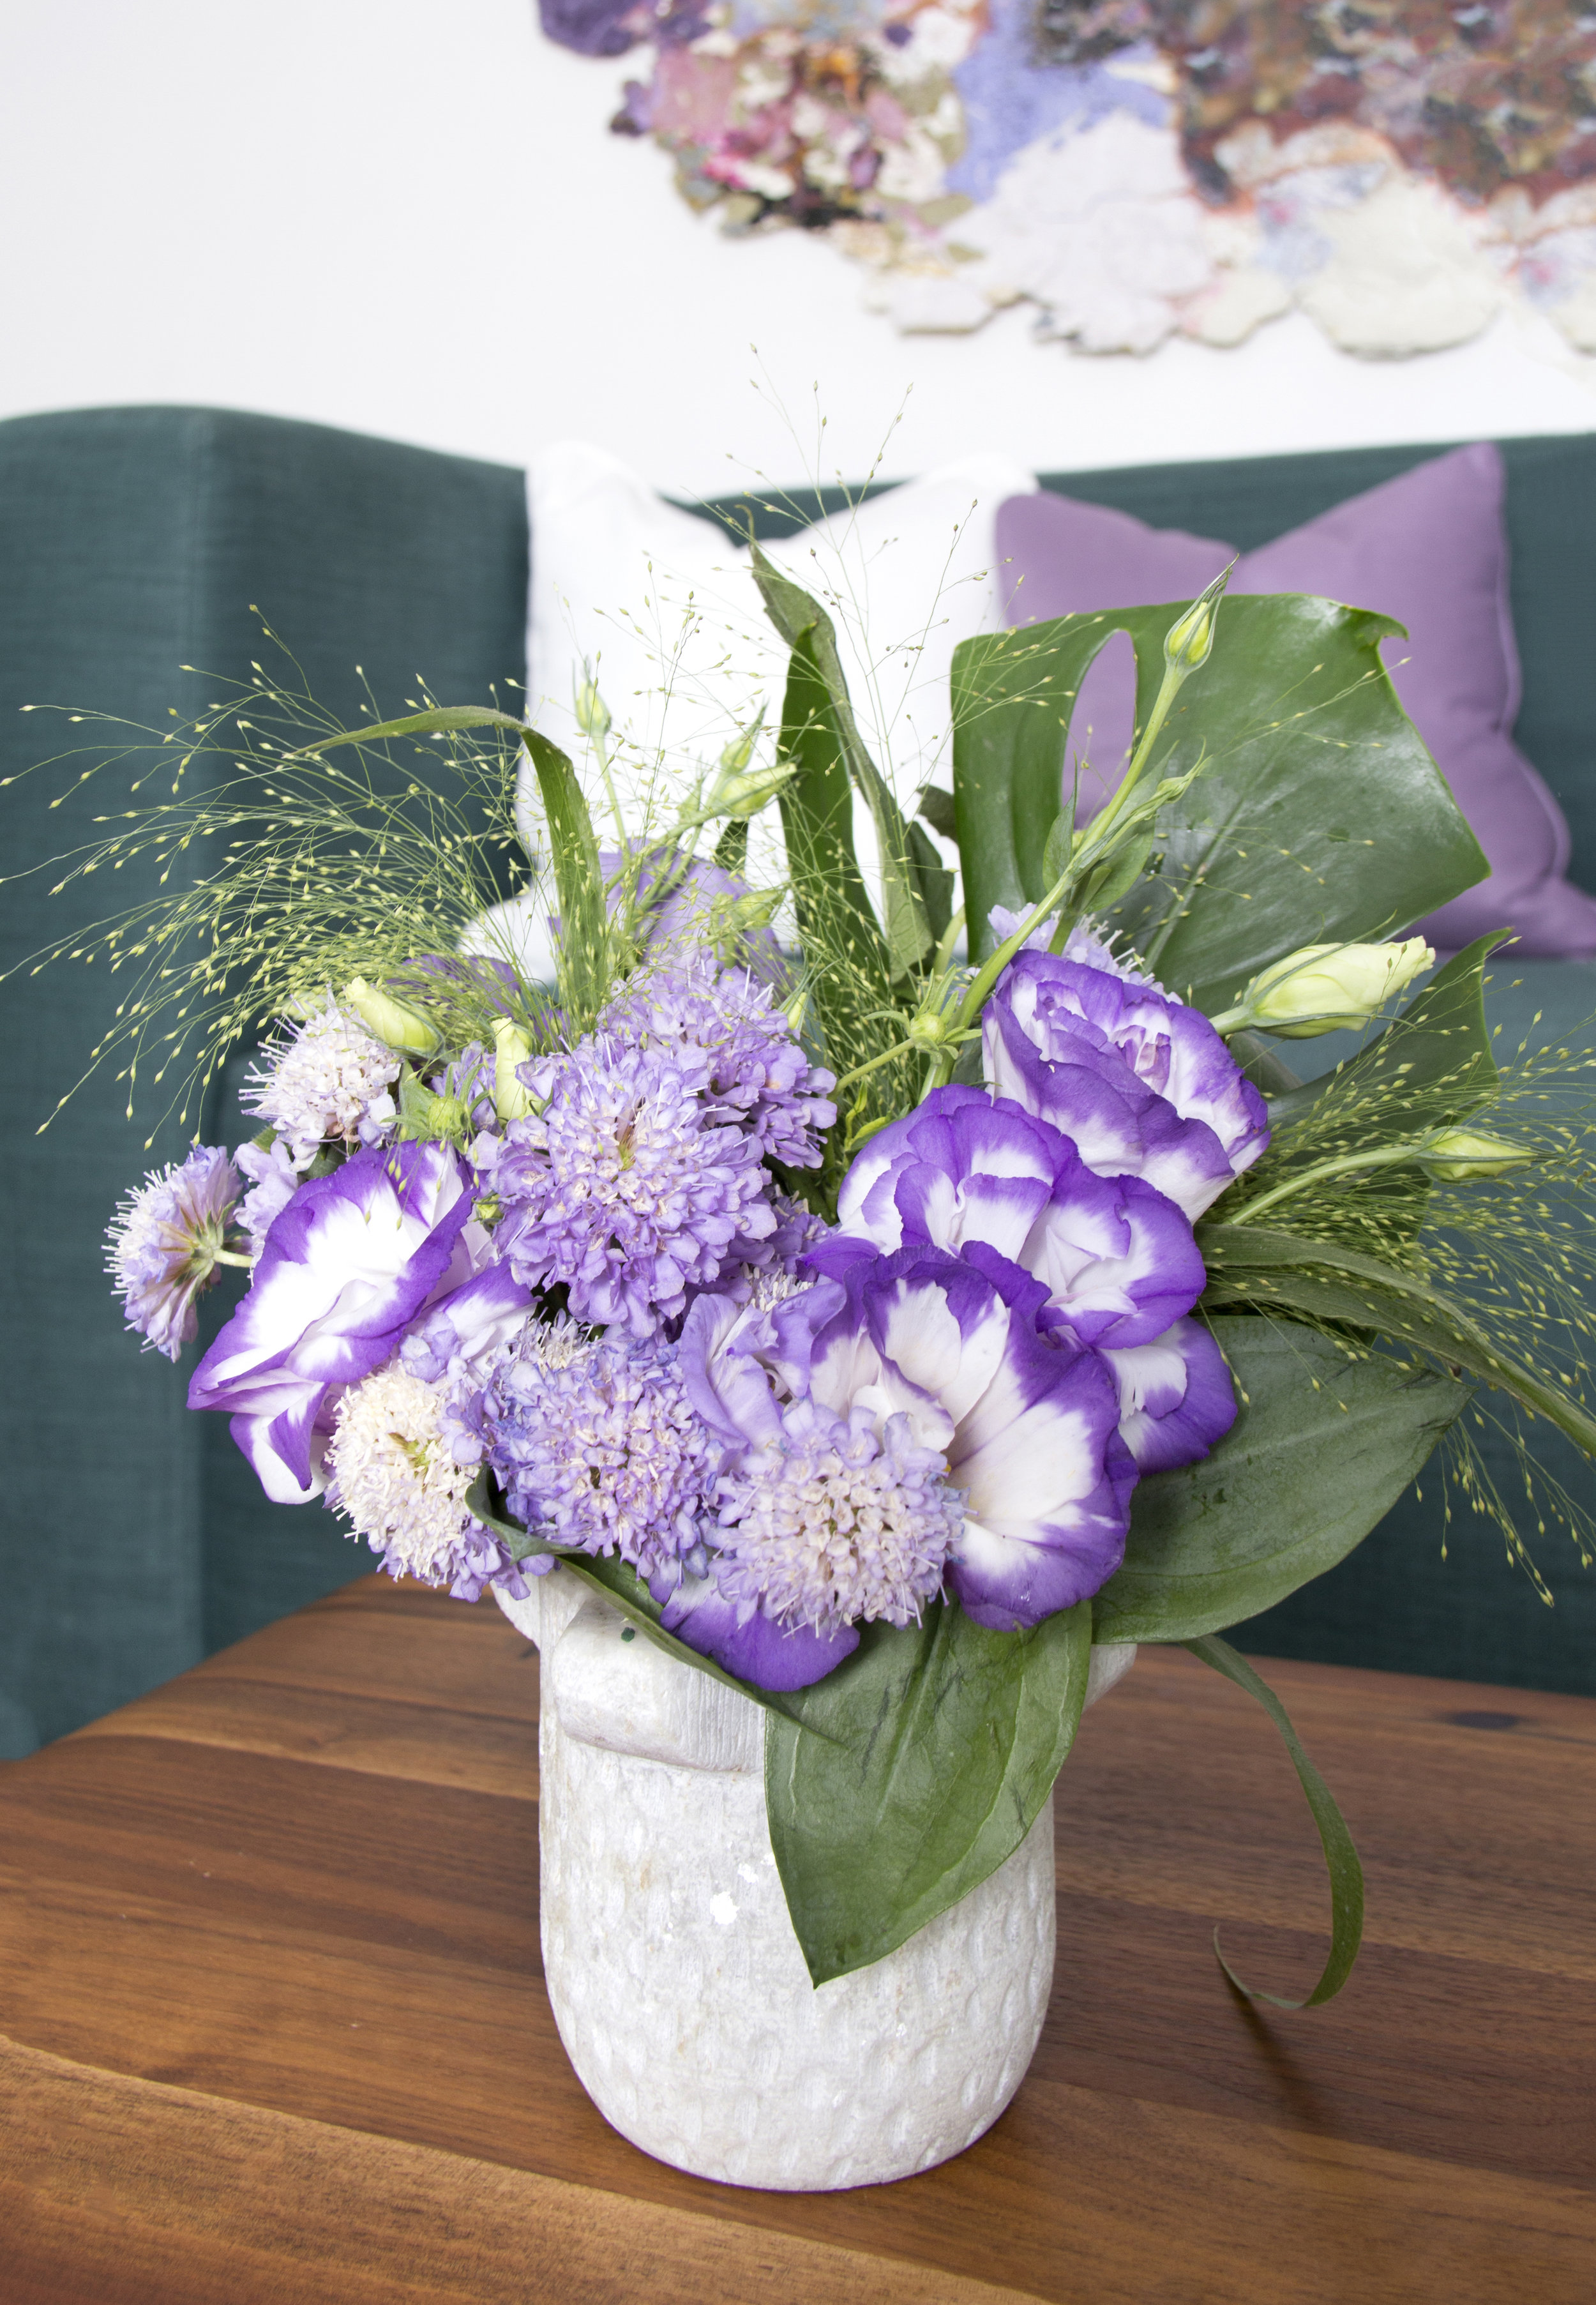 Fresh flowers add life and warmth to a contemporary space.